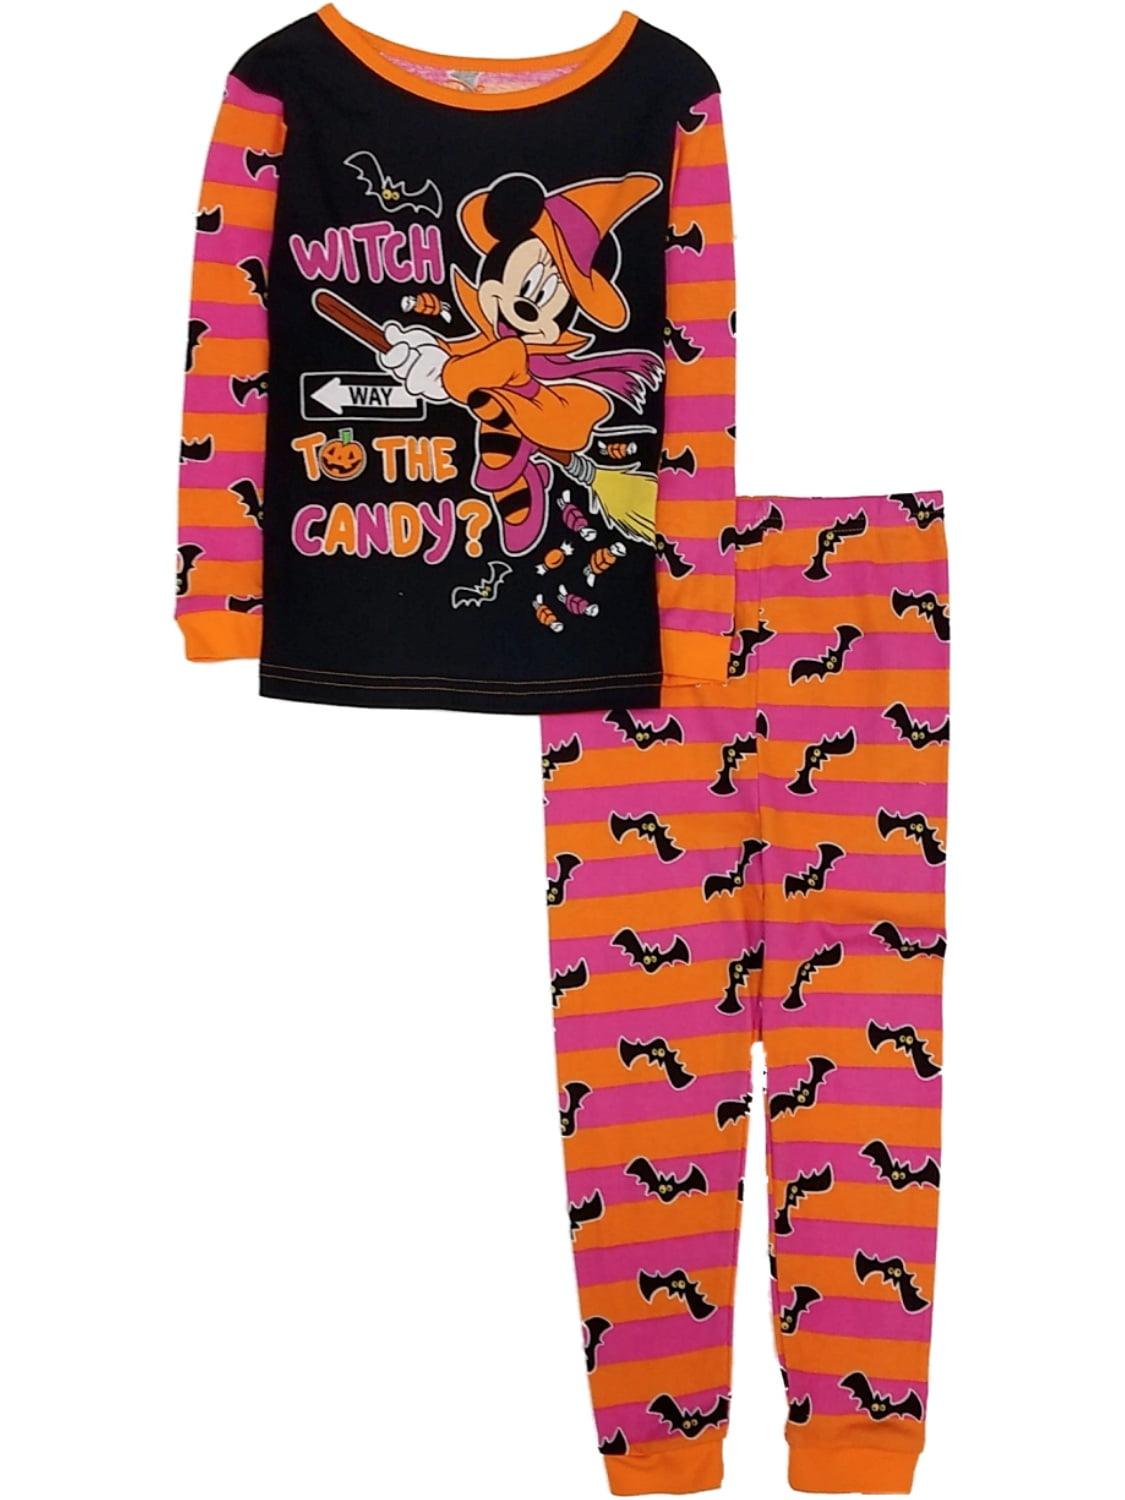 NWT Disney Minnie Mouse Halloween Pajamas Set Witch Way to the Candy CHOOSE SIZE 